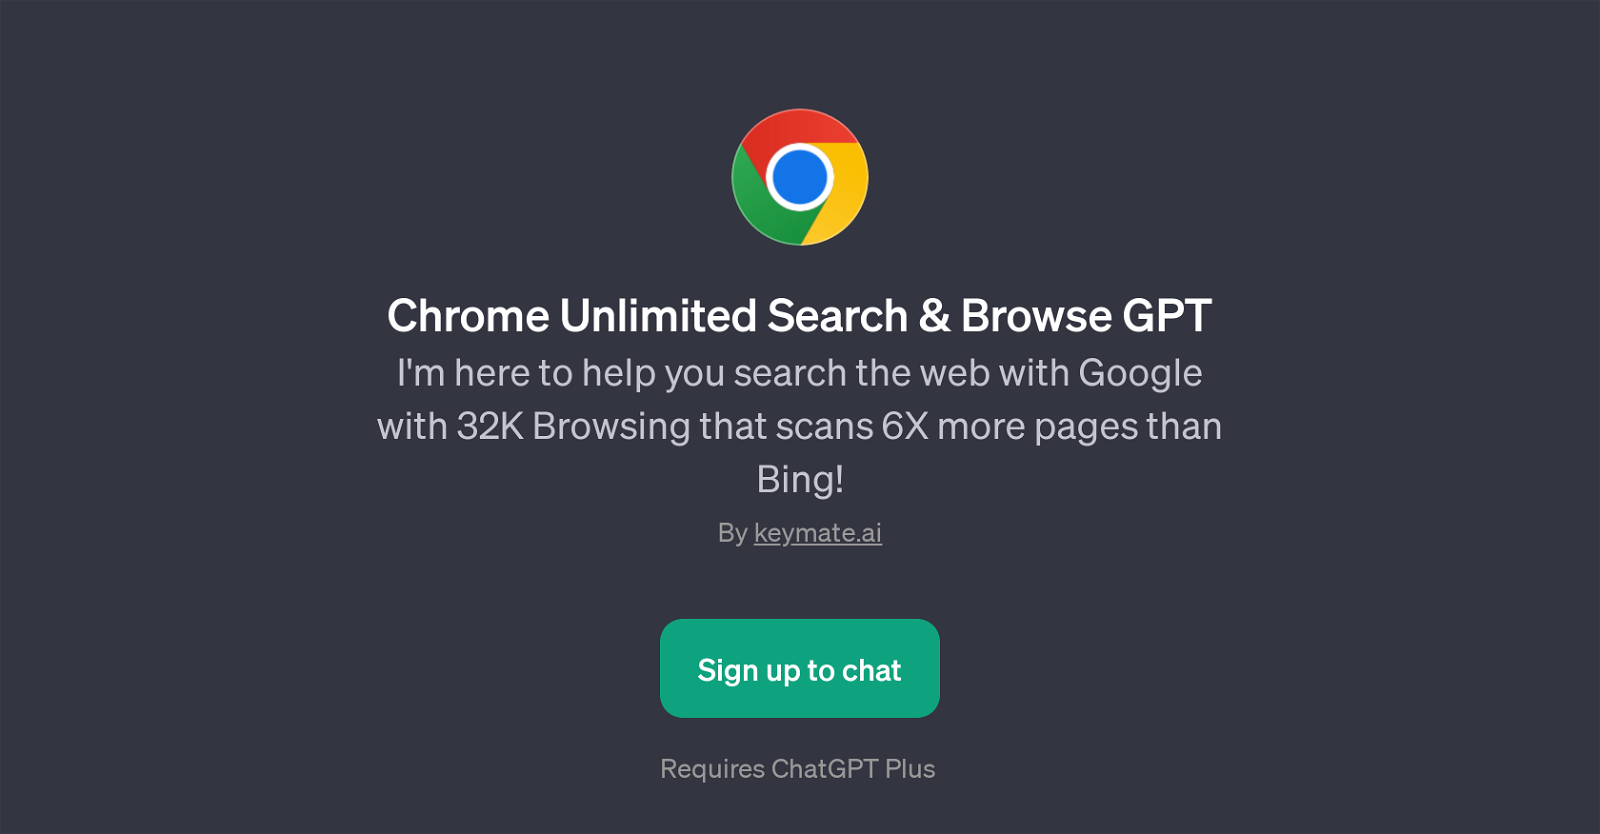 Chrome Unlimited Search & Browse GPT website